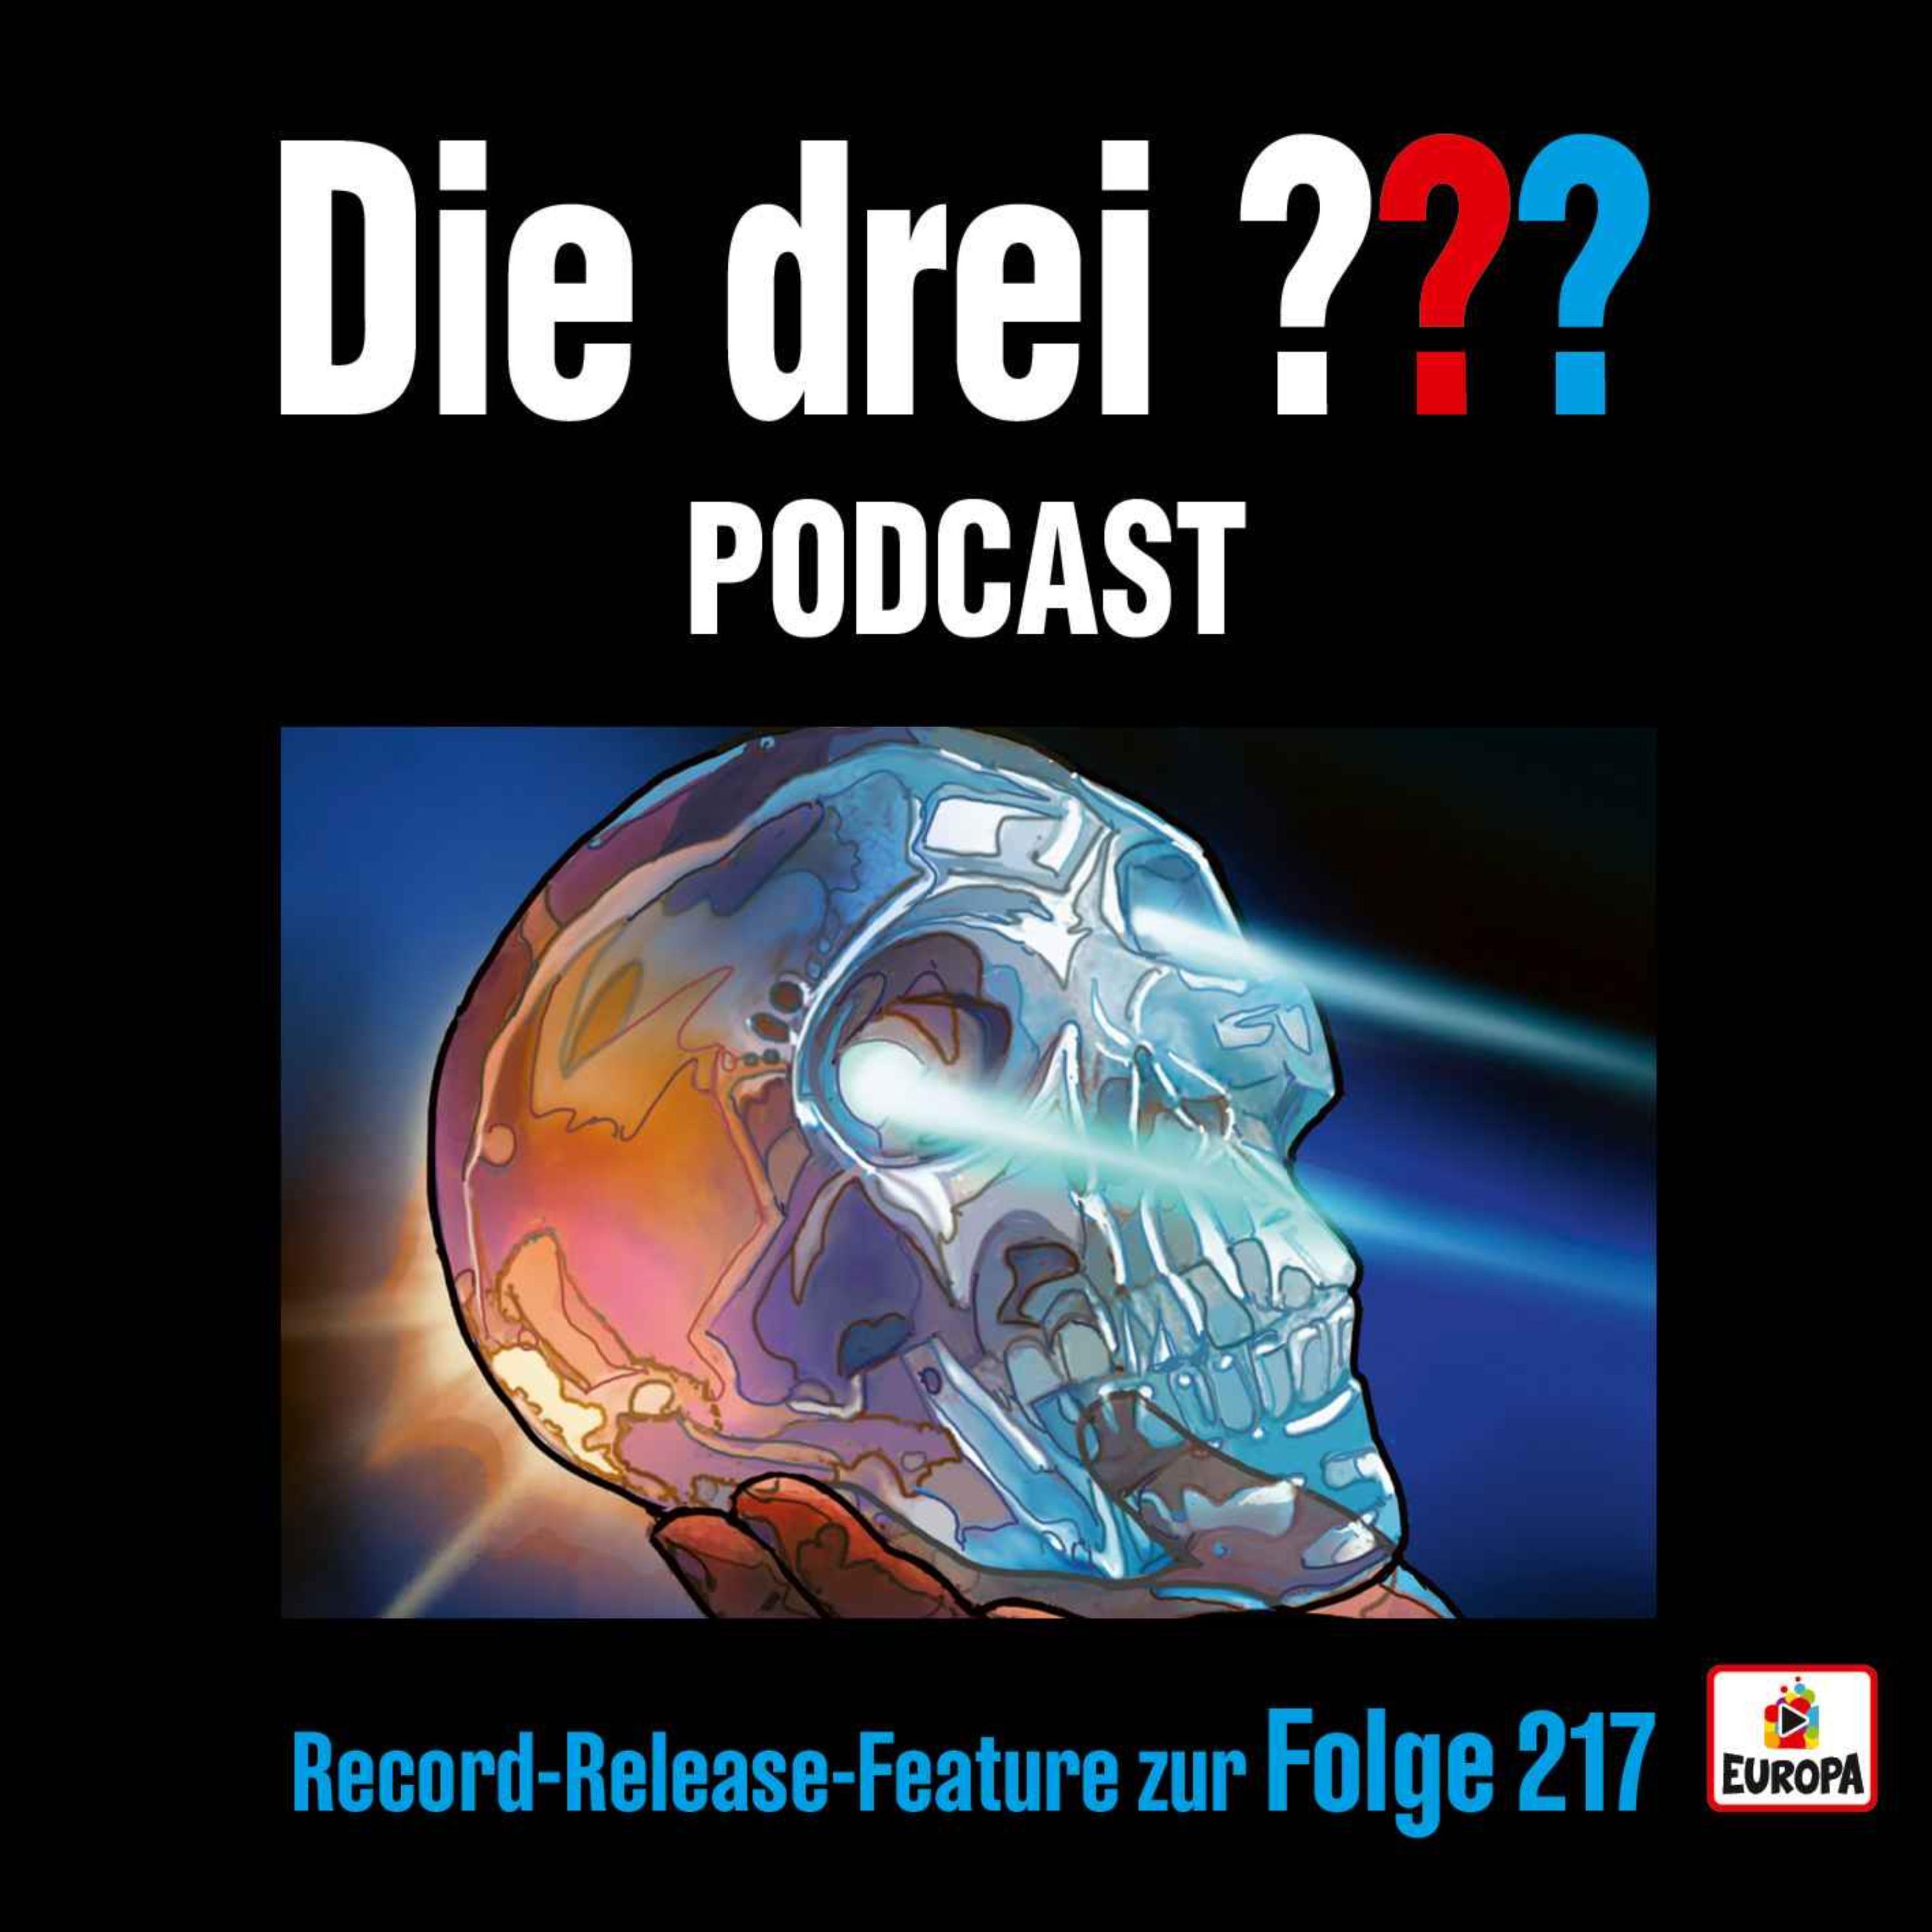 Record-Release-Feature zur Folge 217